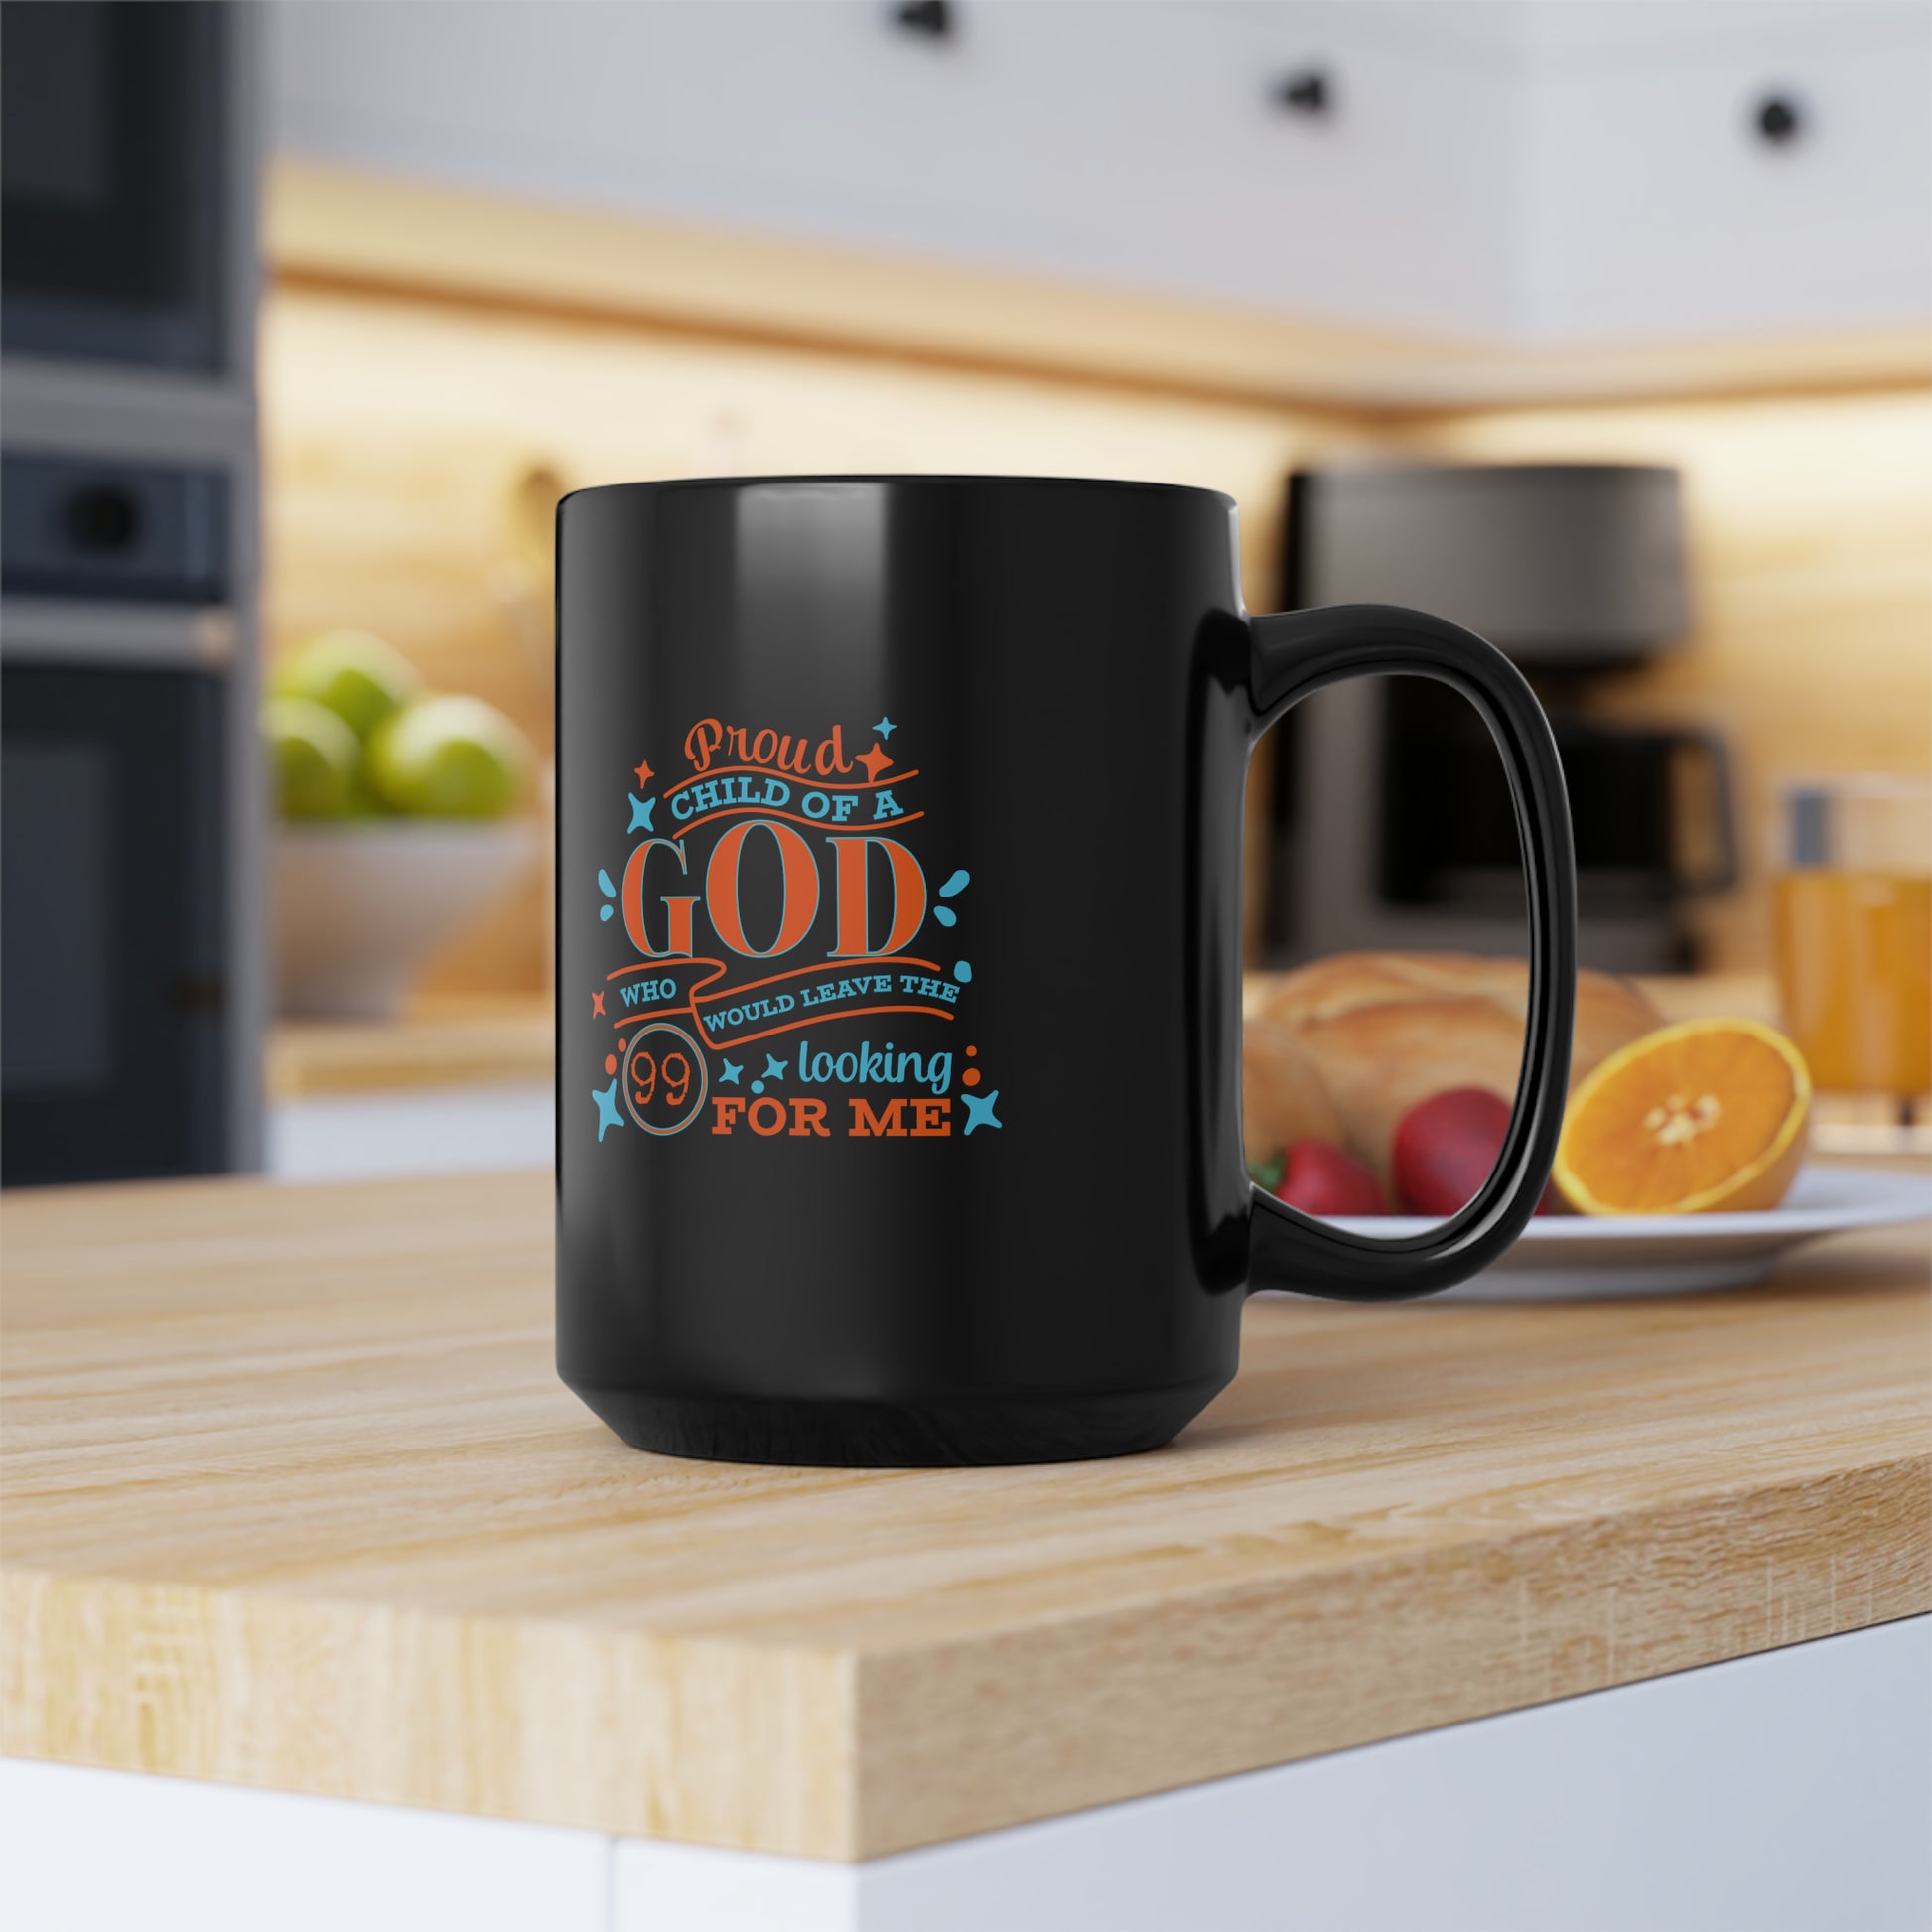 Proud Child Of A God Who Would Leave The 99 Looking For Me Black Ceramic Mug, 15oz (double sided printing) Printify